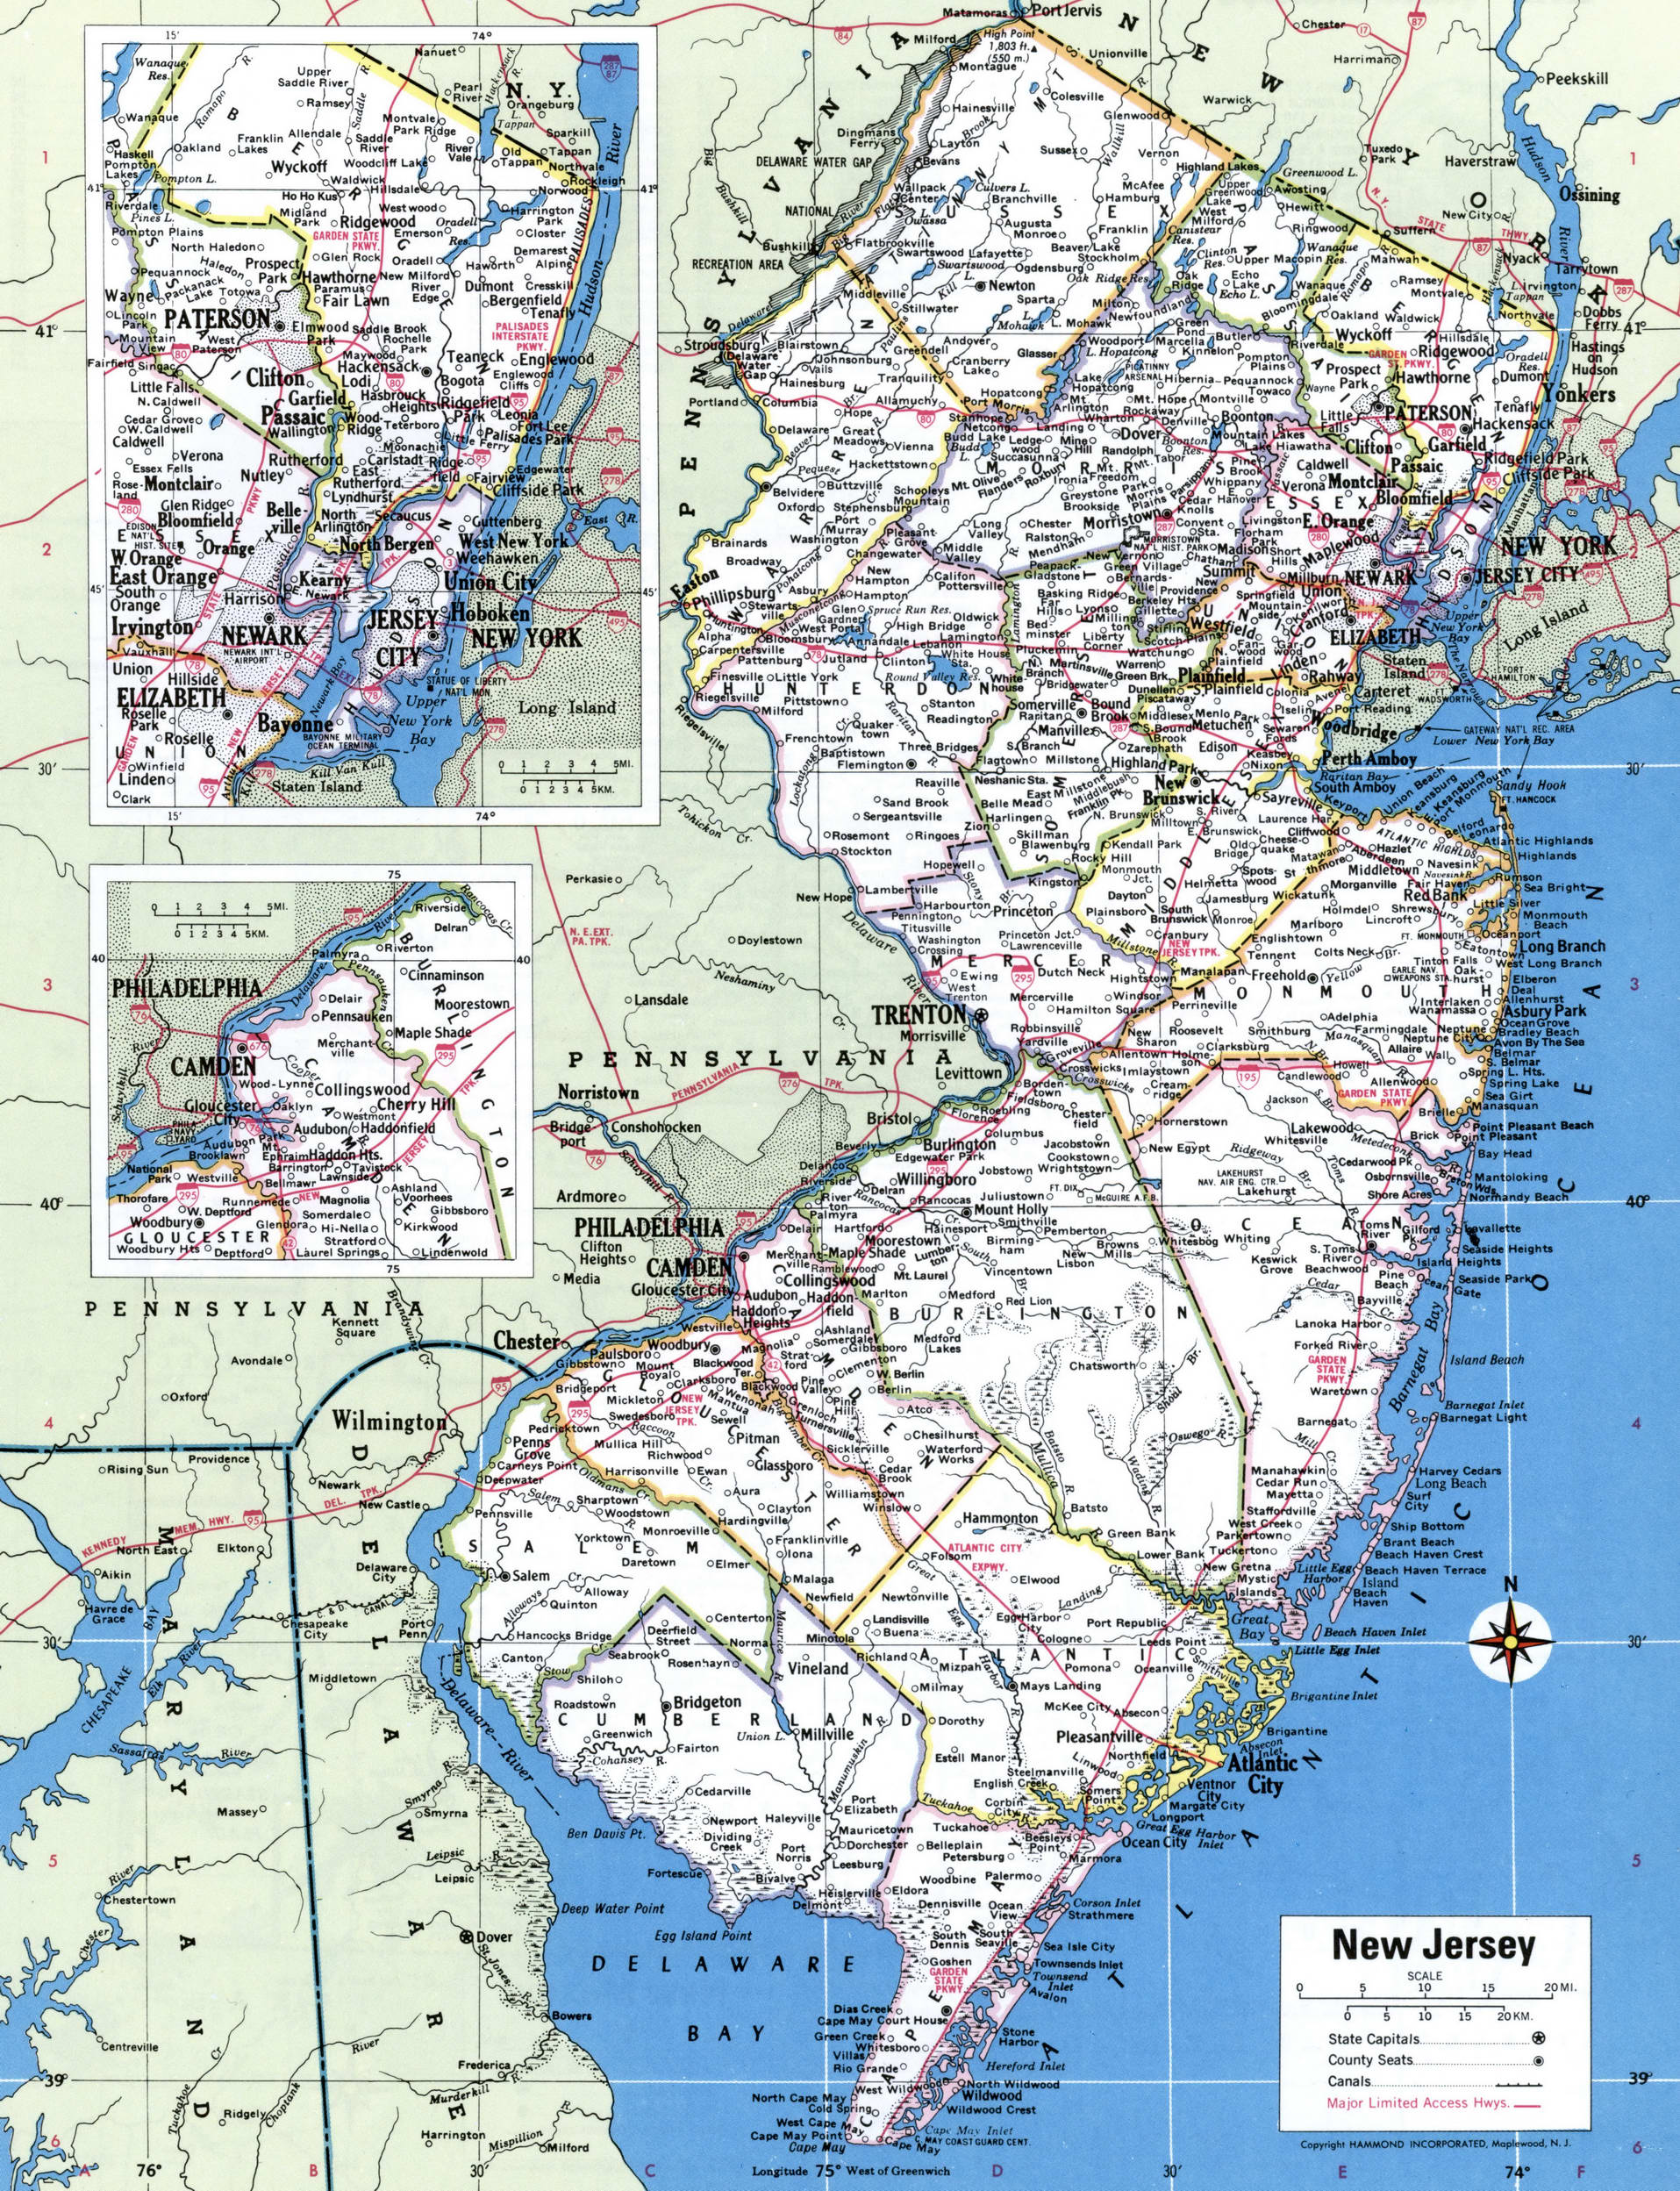 New Jersey map with counties